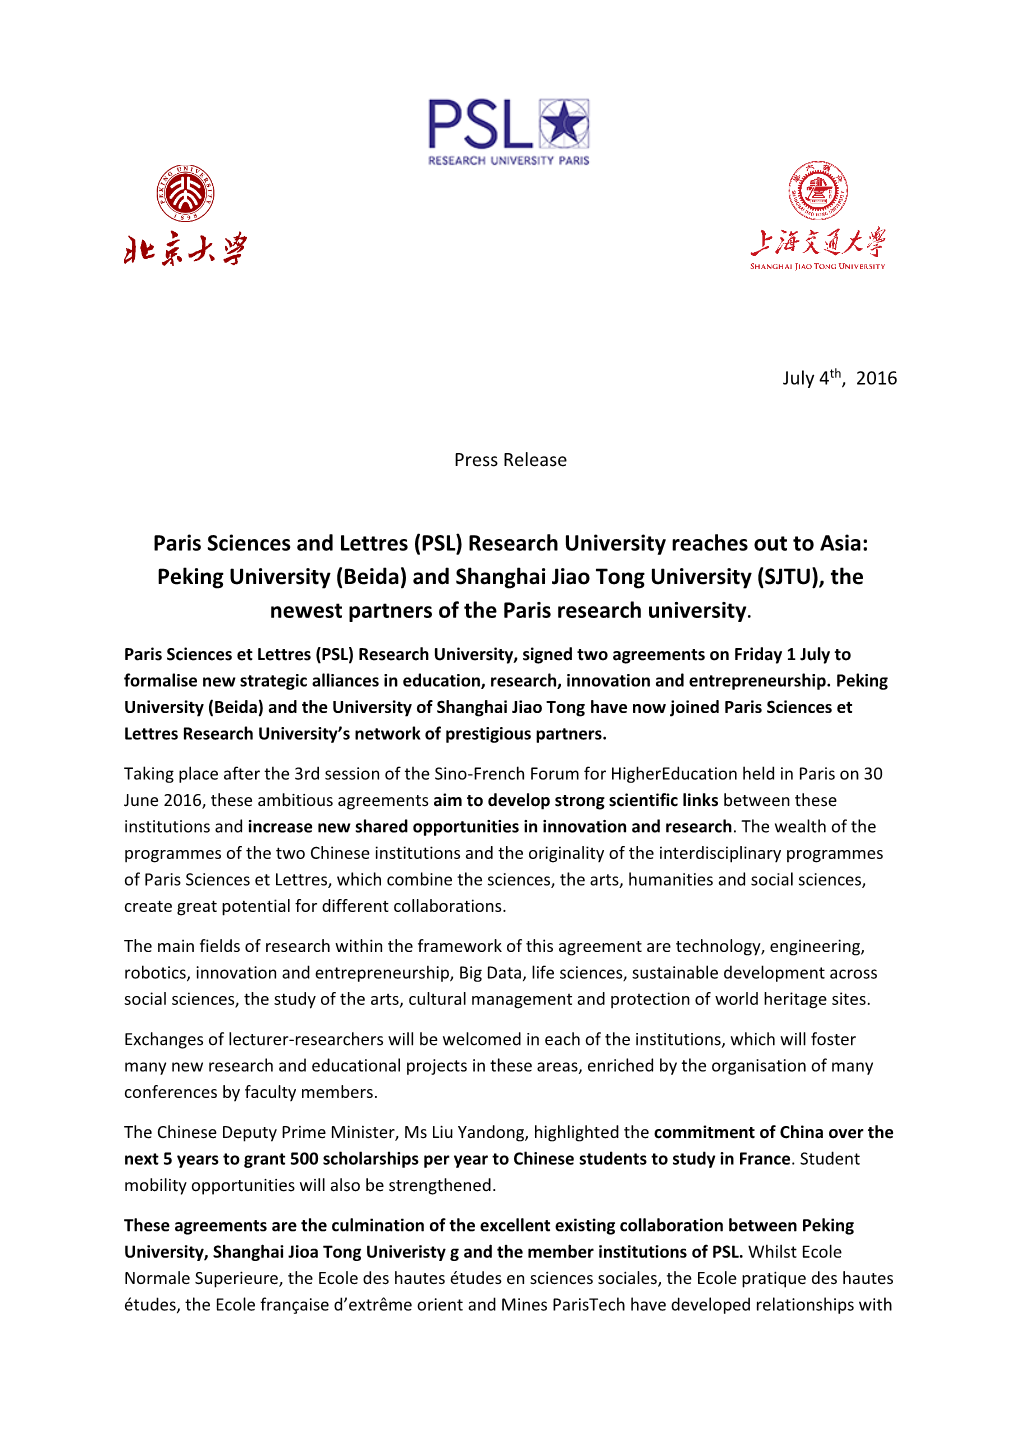 Paris Sciences and Lettres (PSL) Research University Reaches out To